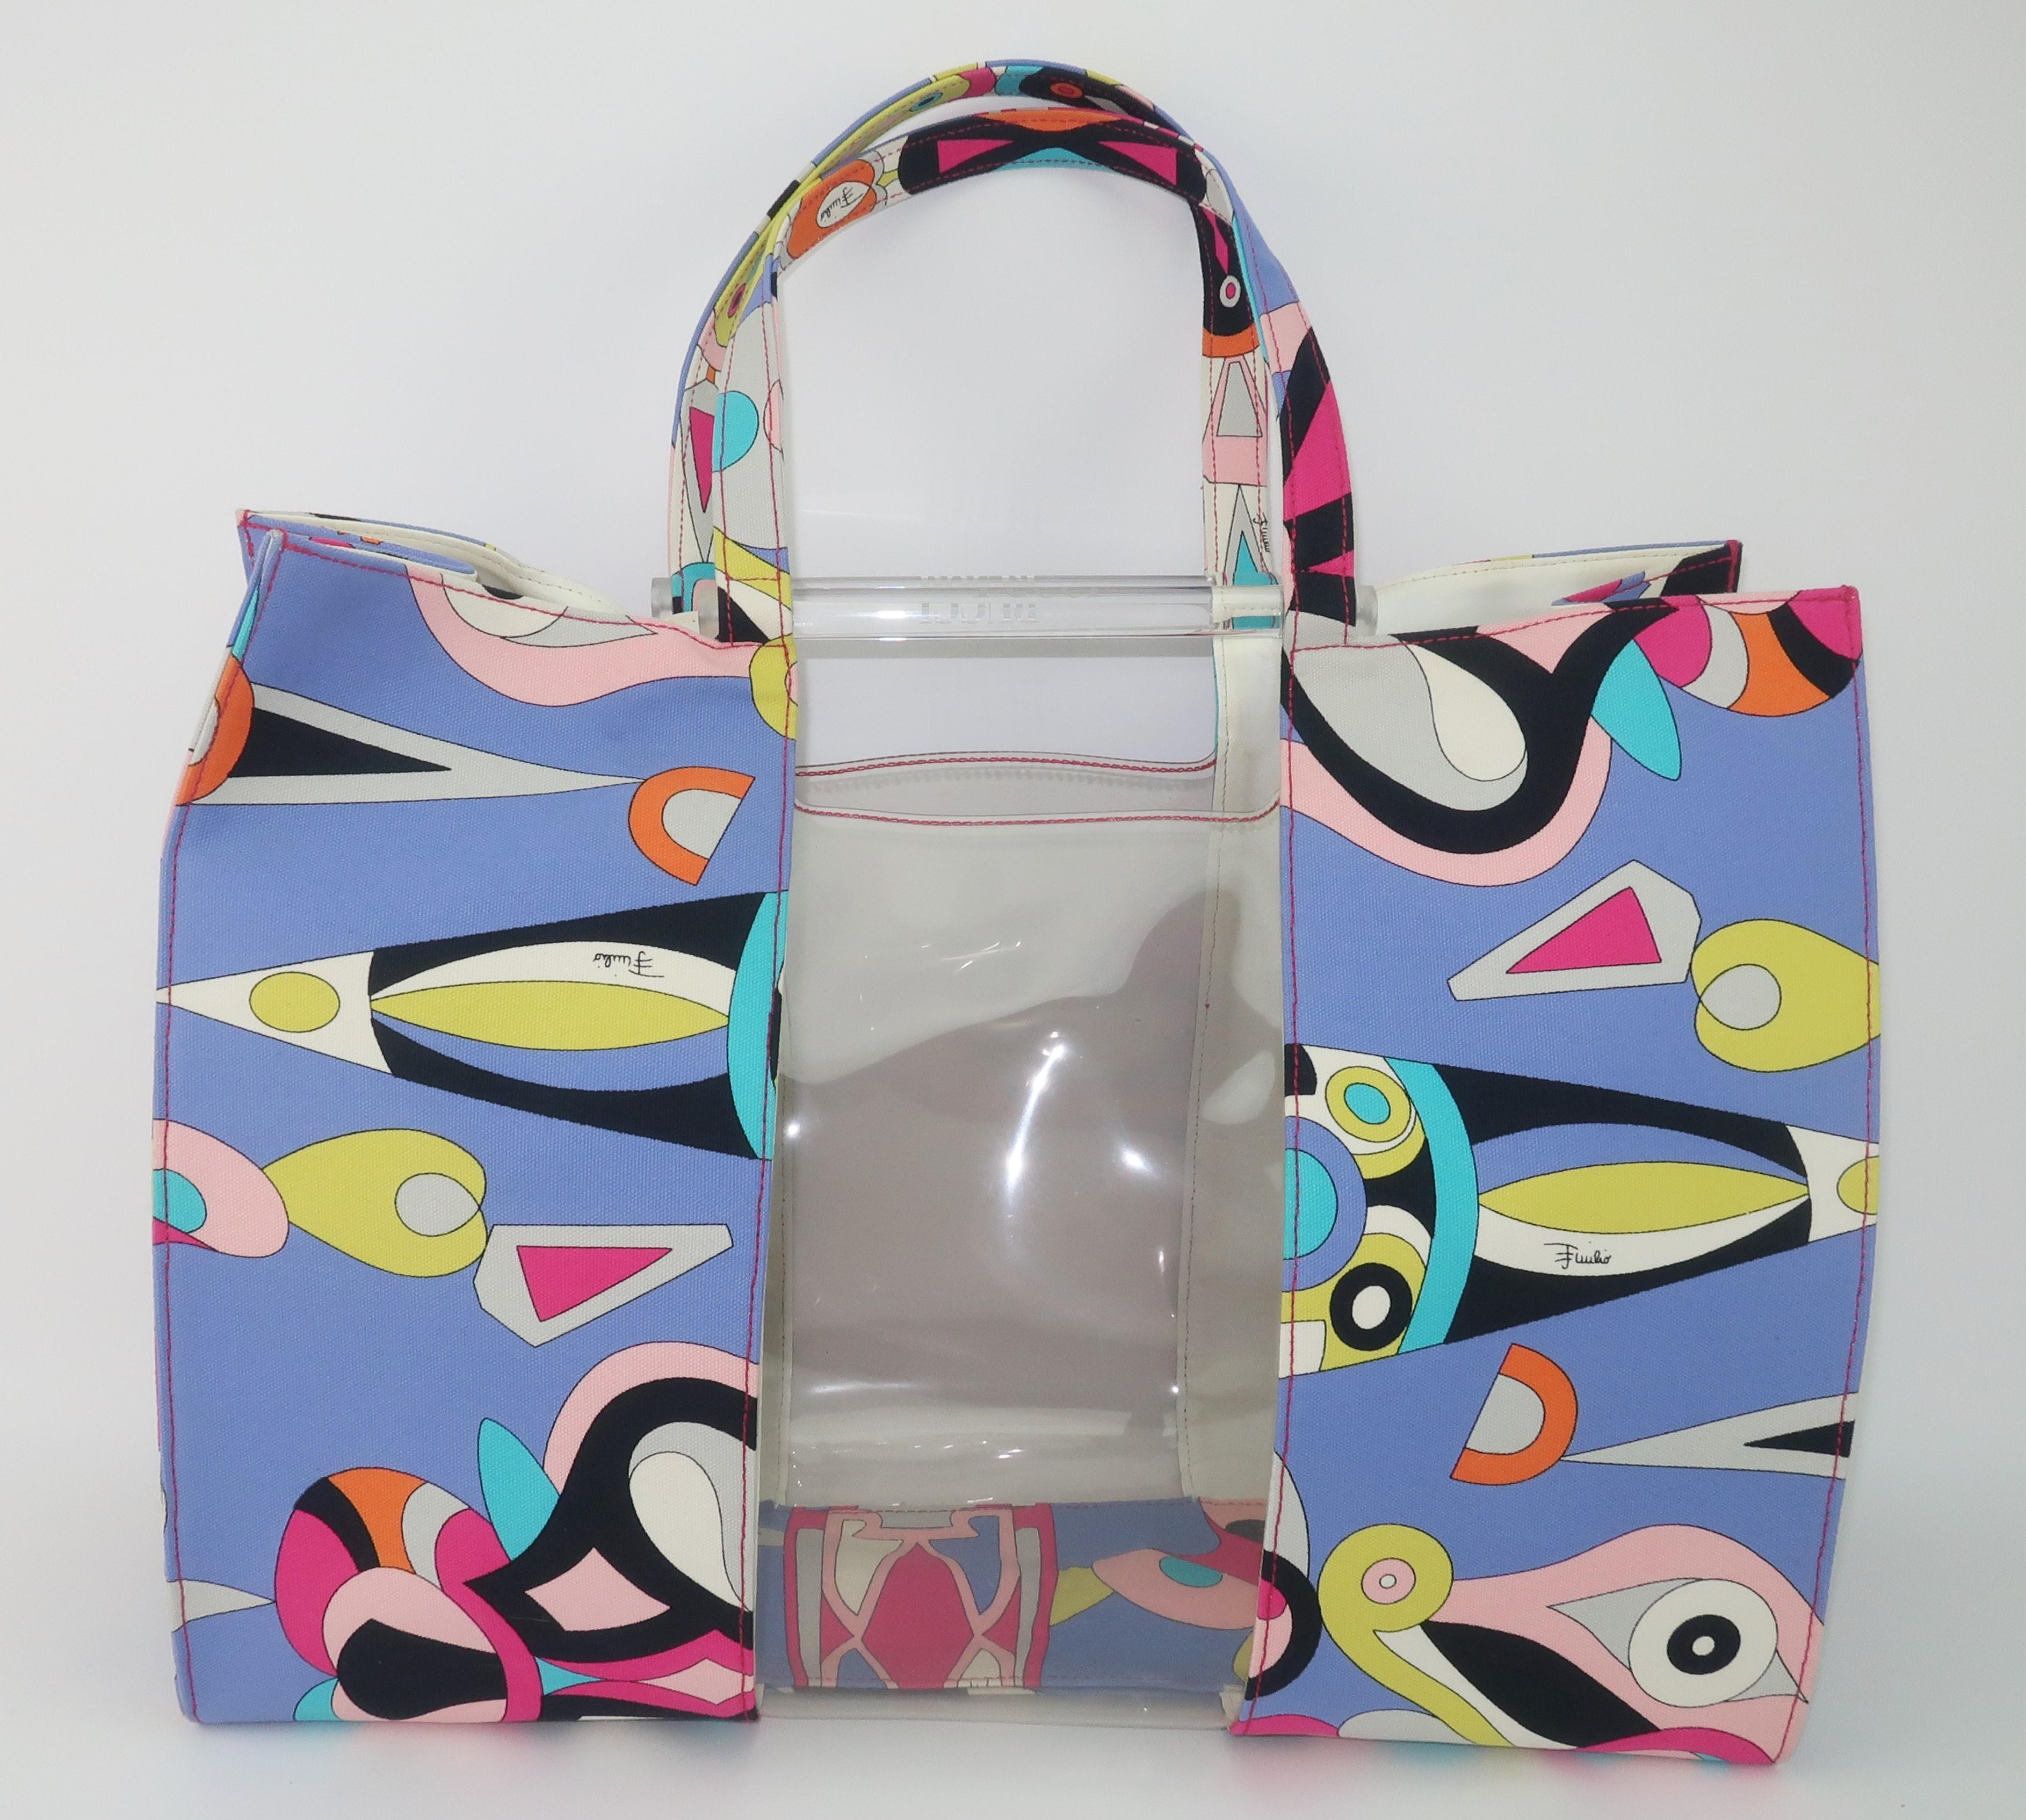 A fun Emilio Pucci canvas tote handbag with a great combination of an iconic psychedelic print and a functional roomy size that would be great for a stylish beach bag or a carryall for casual occasions.  The vibrant Pucci print has a periwinkle blue